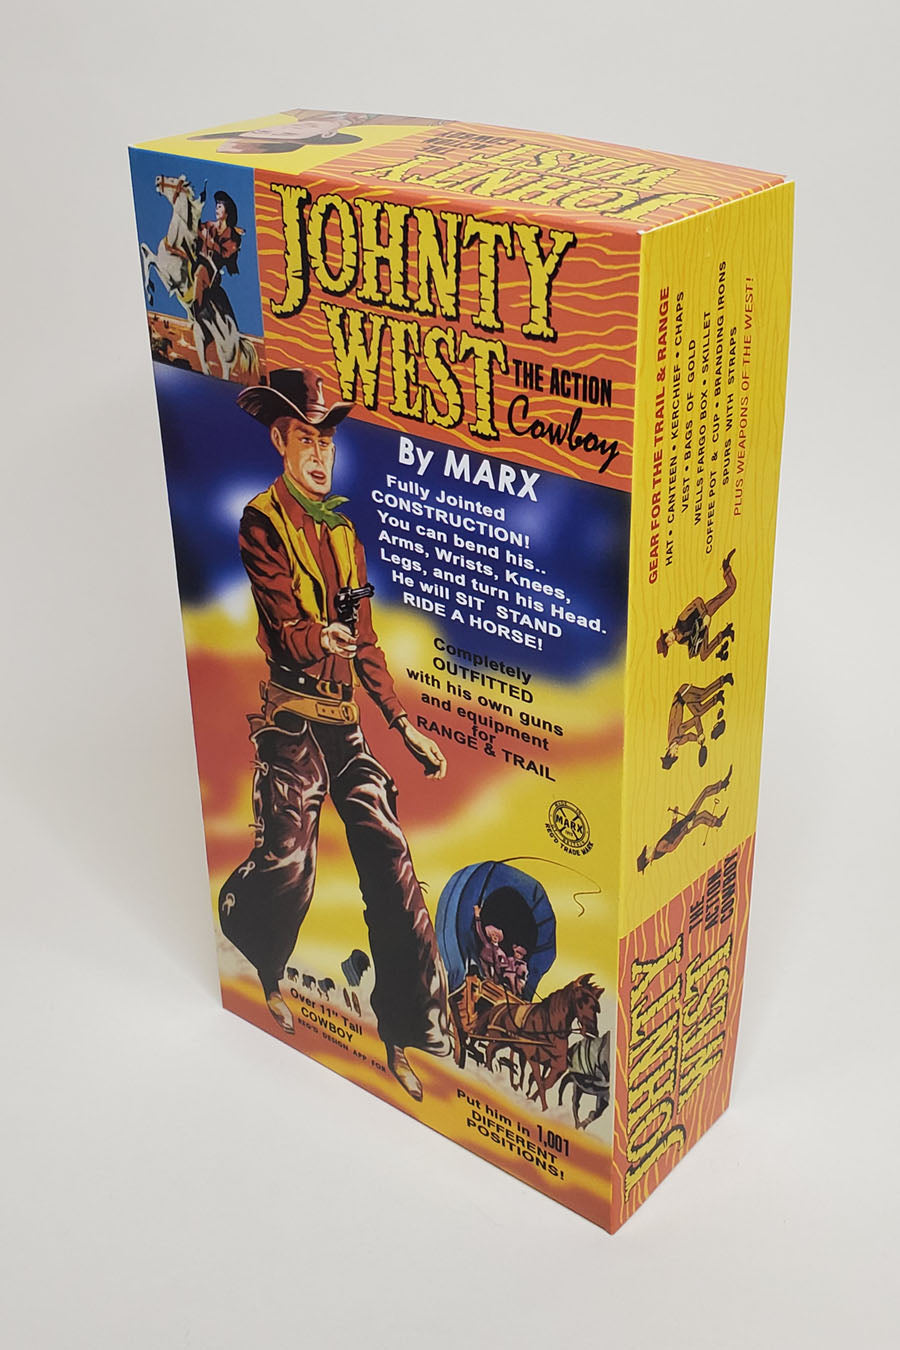 Johnty West – UK - 1st series, Reproduction Box (and Manuals)